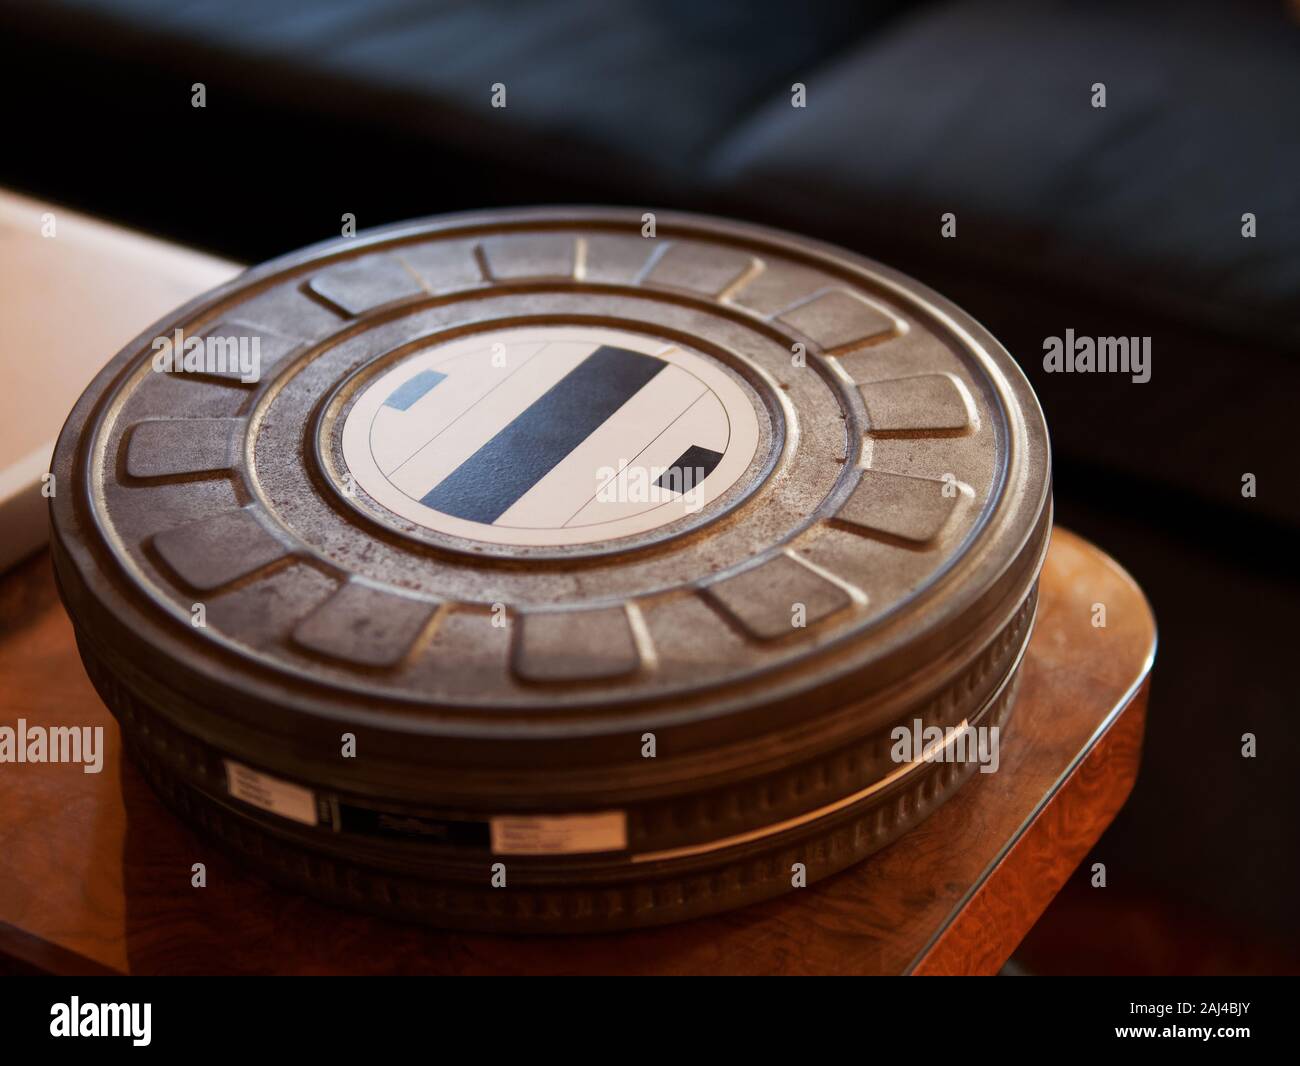 https://c8.alamy.com/comp/2AJ4BJY/close-up-of-old-metal-movie-film-reel-canister-on-a-wooden-table-2AJ4BJY.jpg